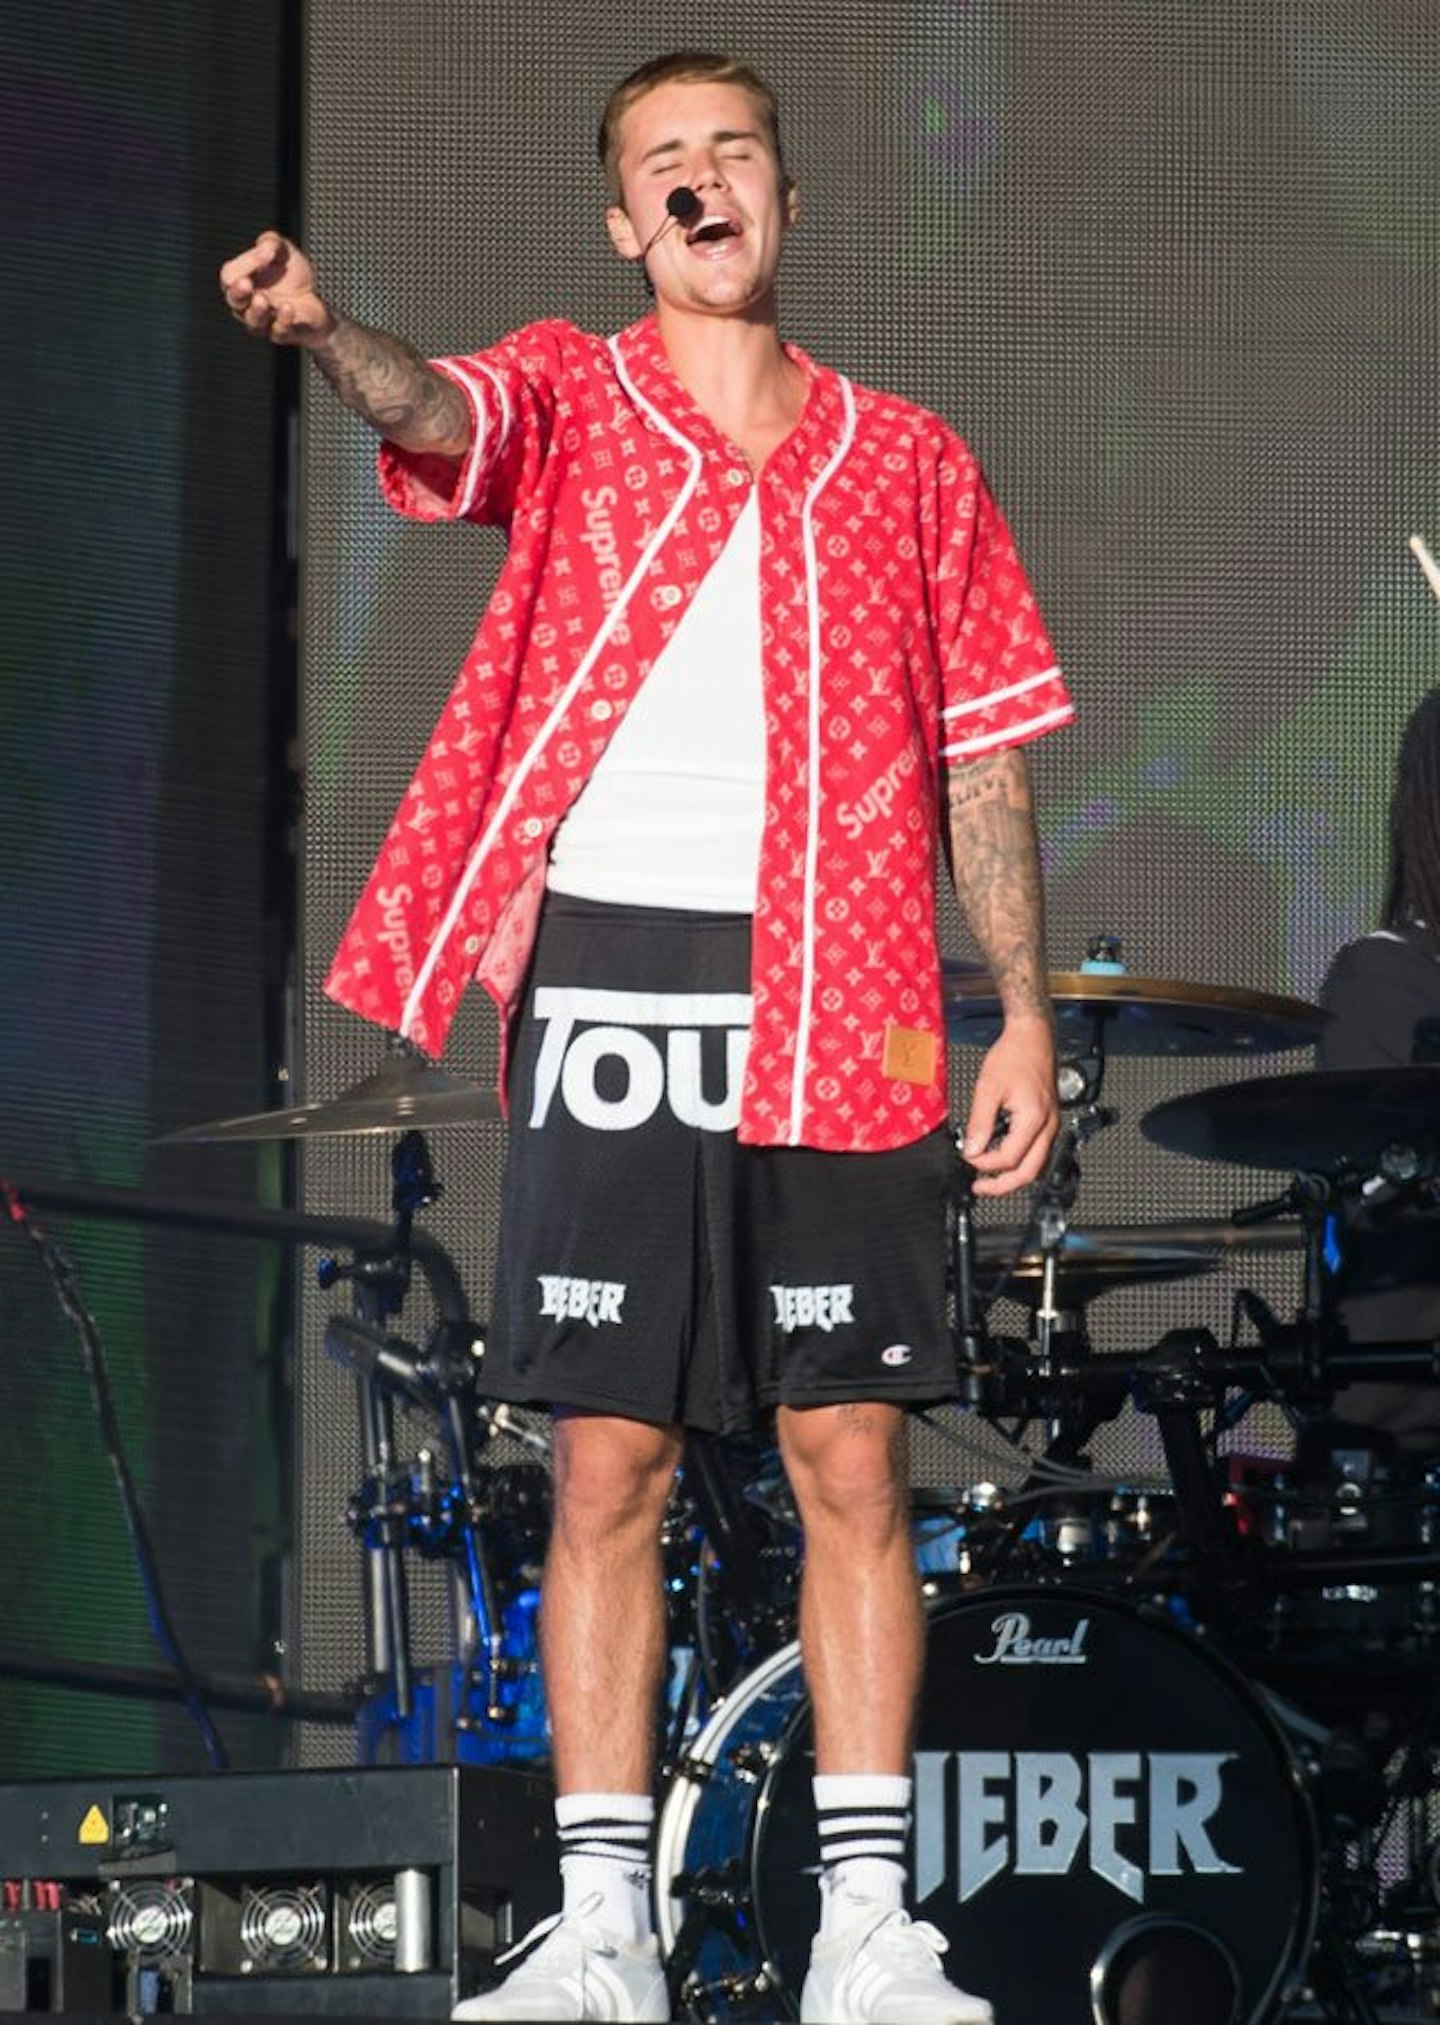 Justin Bieber's Performance Style Reigns Supreme